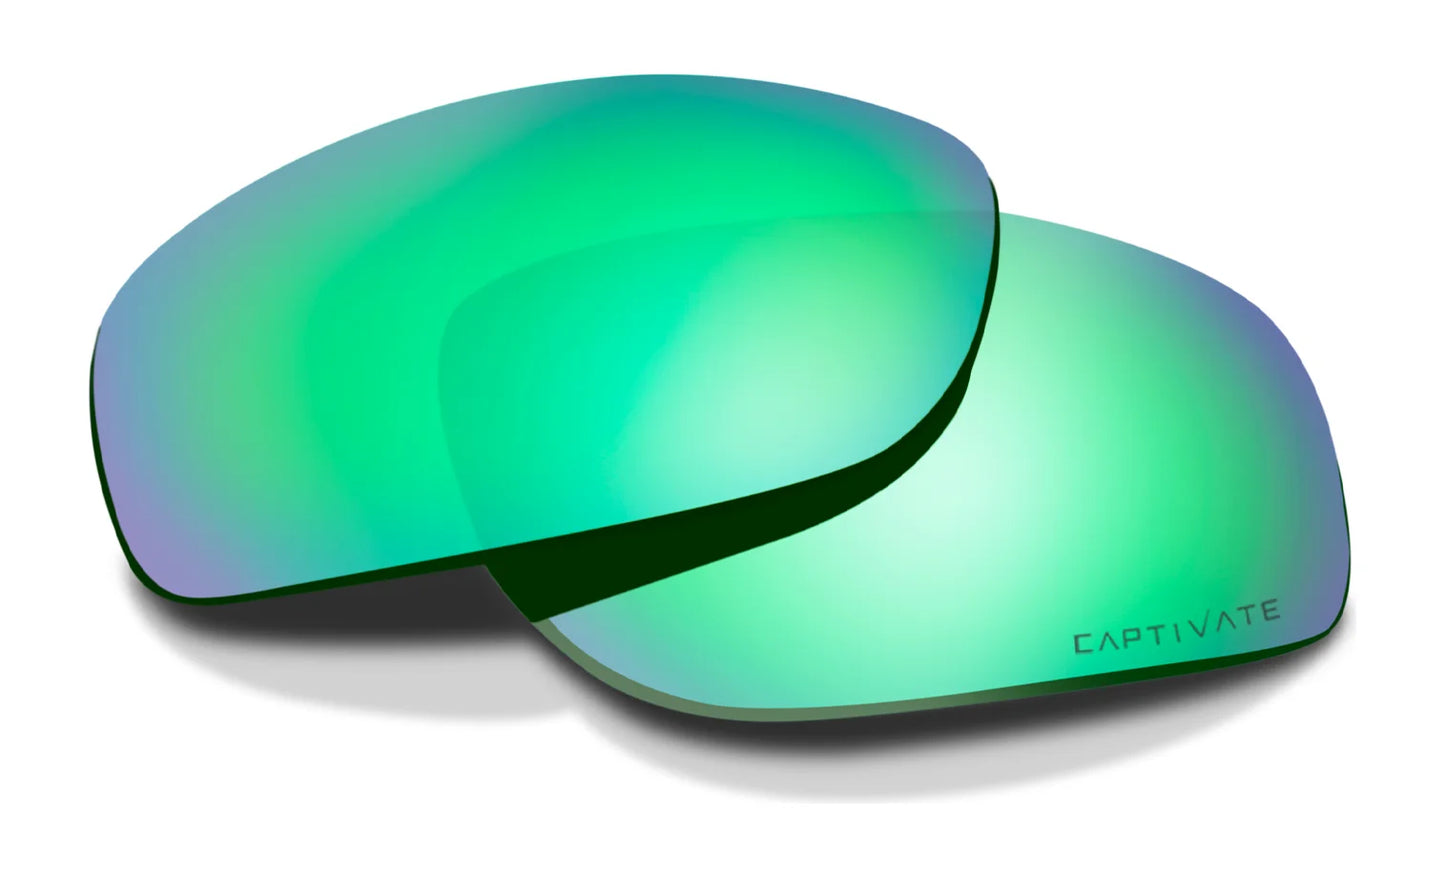 Wiley X HELIX Lens / CAPTIVATE™ Polarized Green Mirror